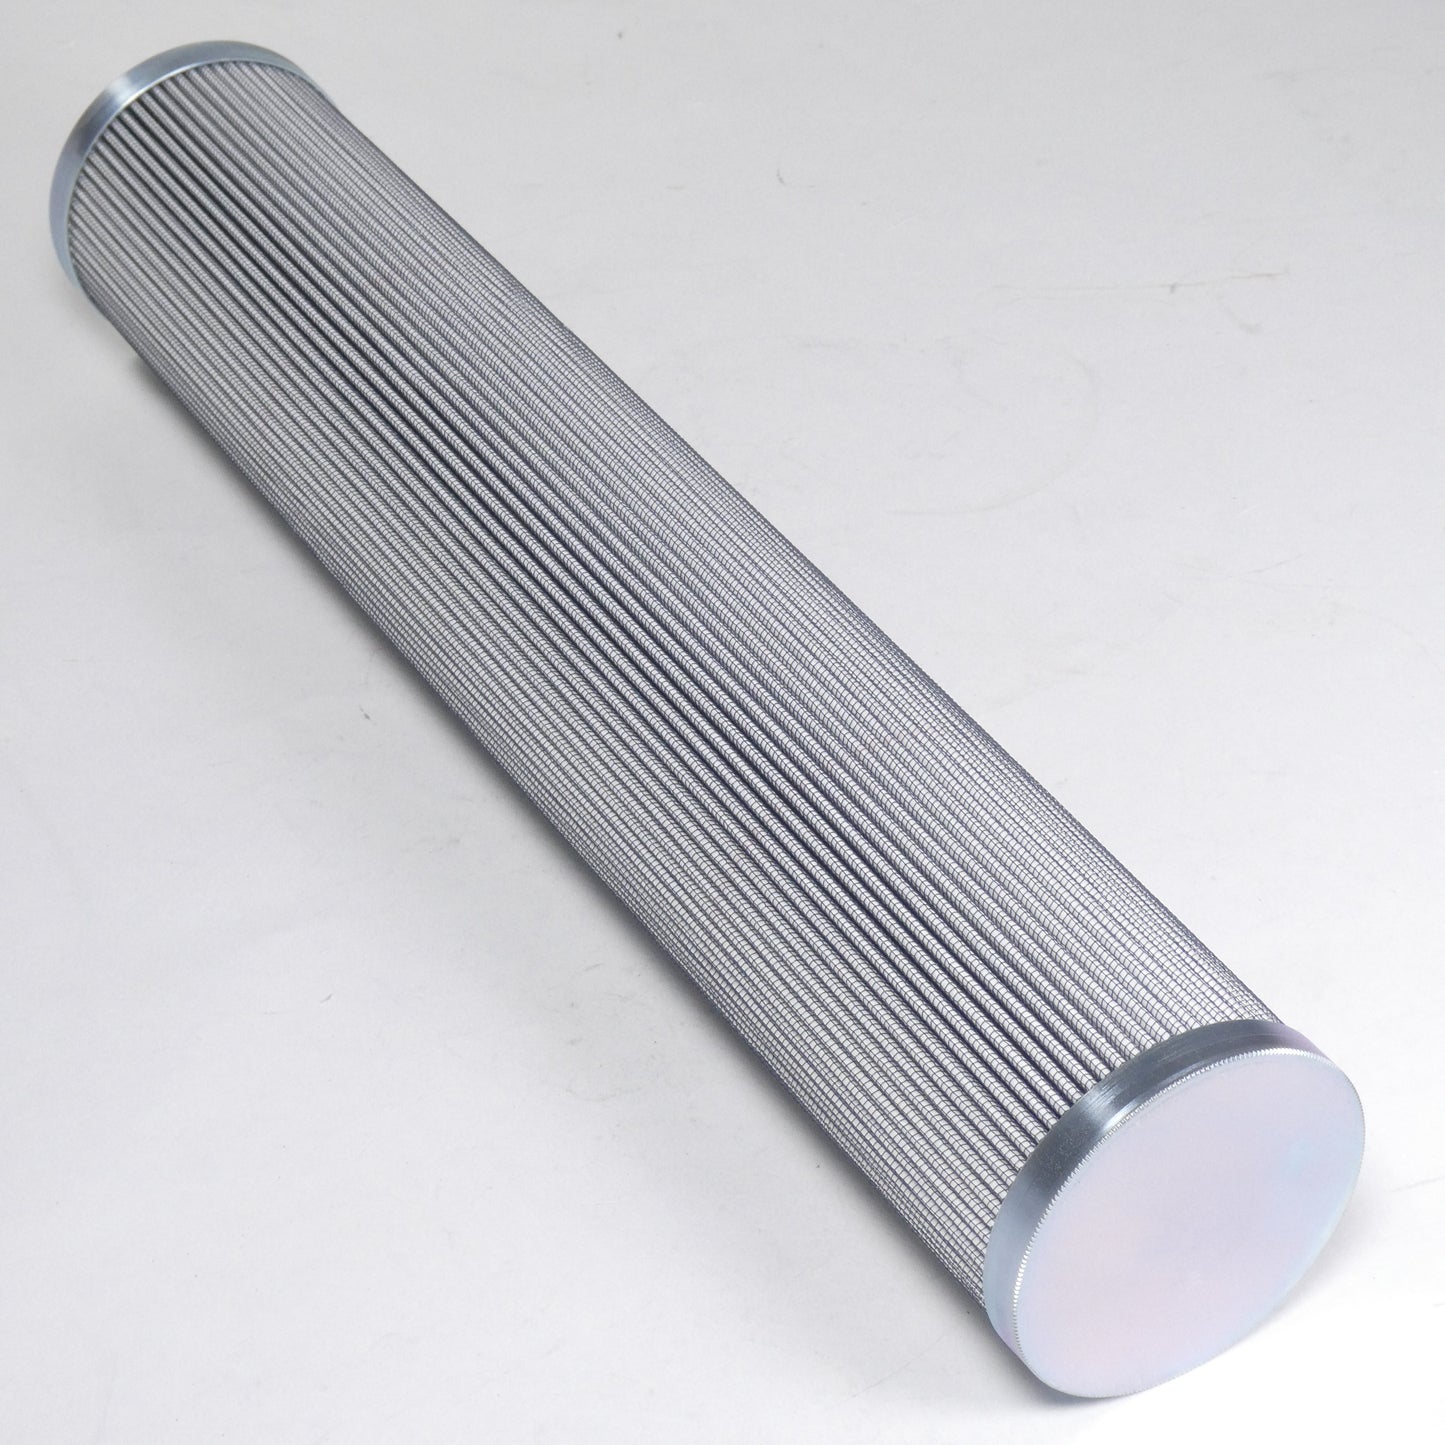 Hydrafil Replacement Filter Element for Fairey Arlon R961-H-1603A